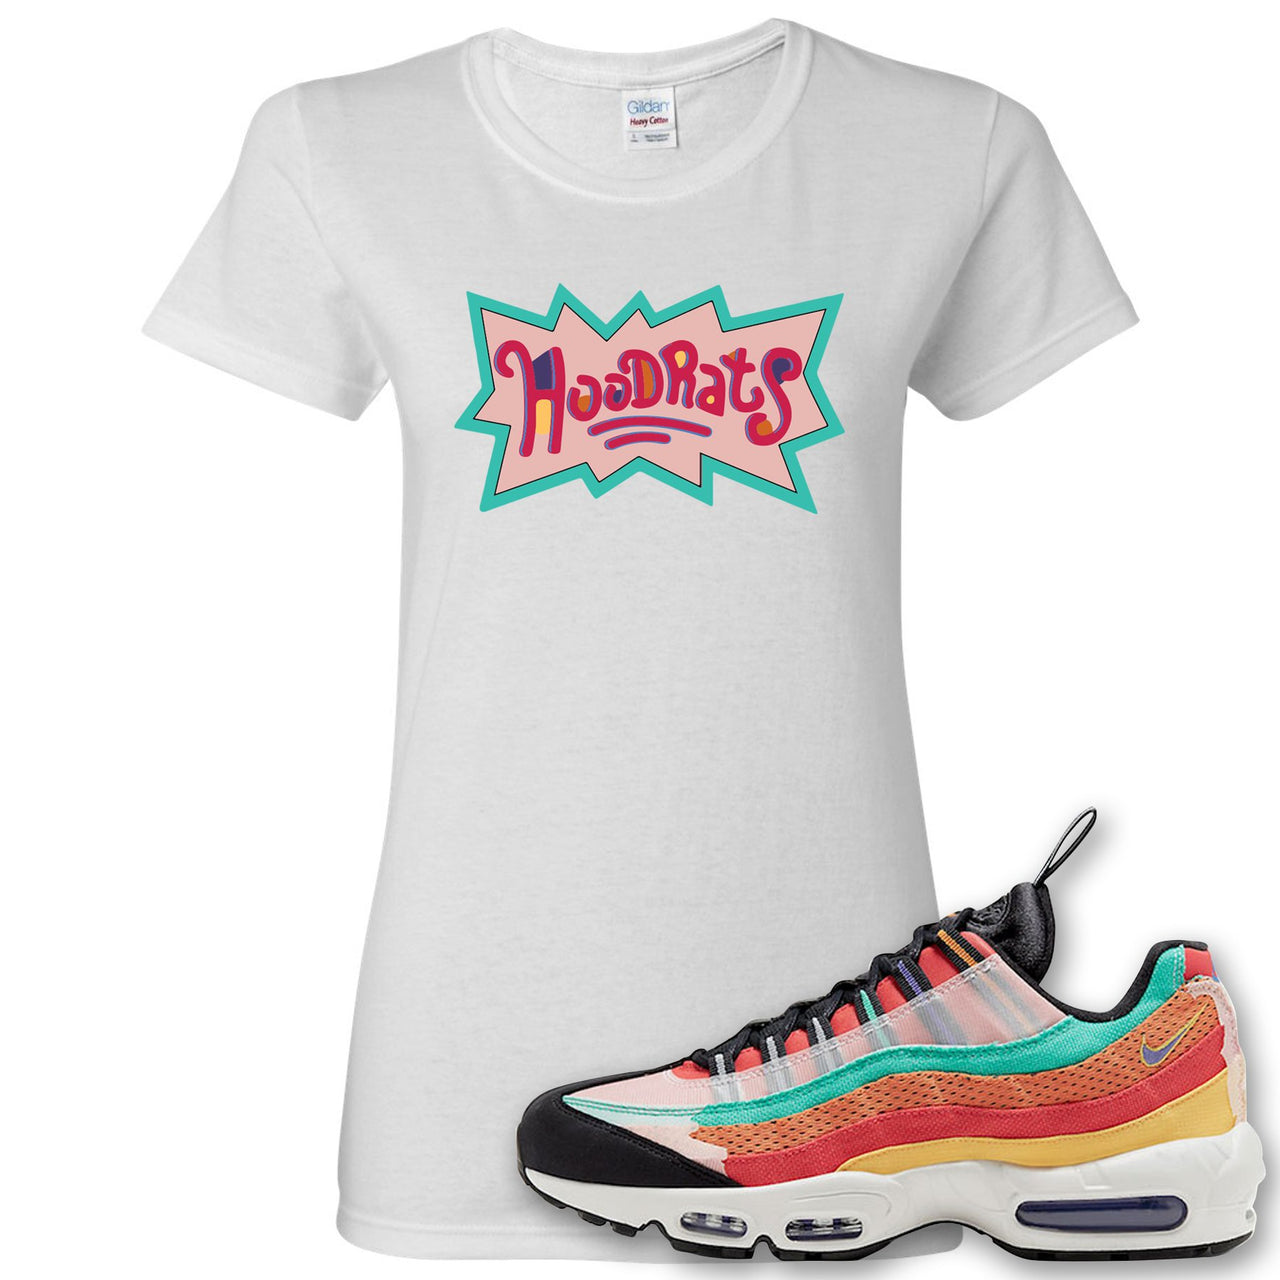 Air Max 95 Black History Month Sneaker White Women's T Shirt | Women's Tees to match Nike Air Max 95 Black History Month Shoes | Hood Rats